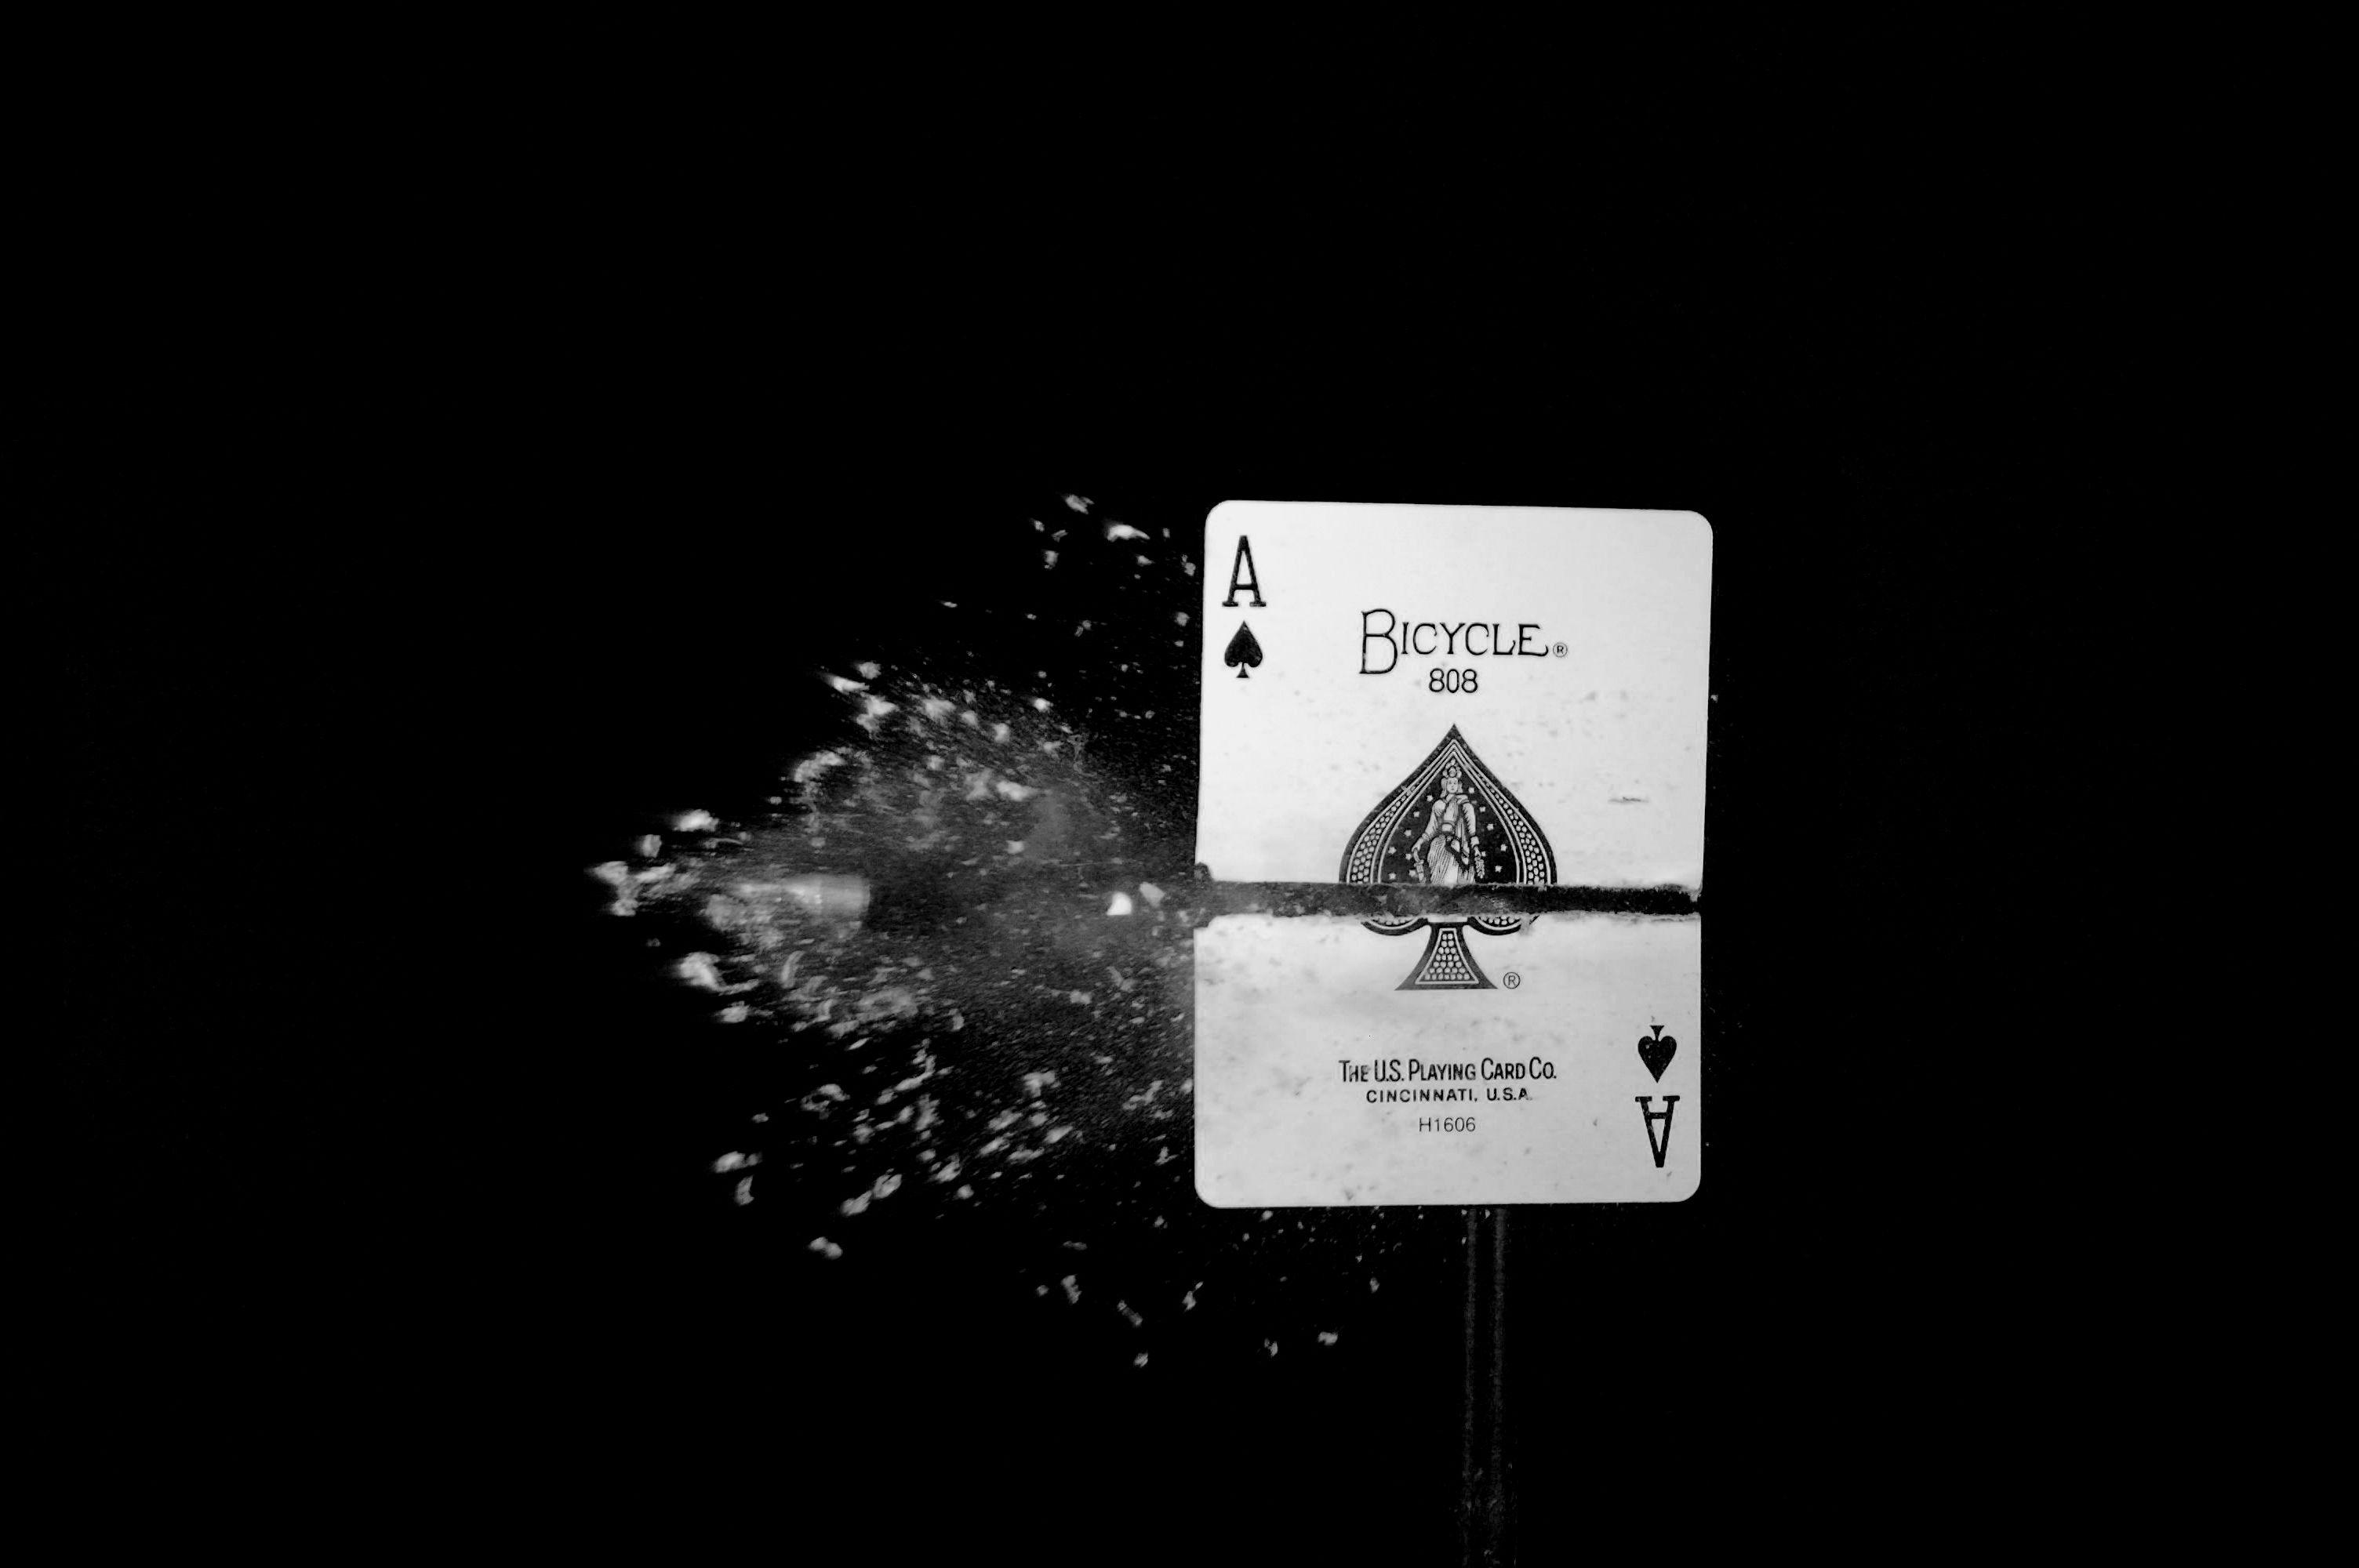 Photos ace of spades download